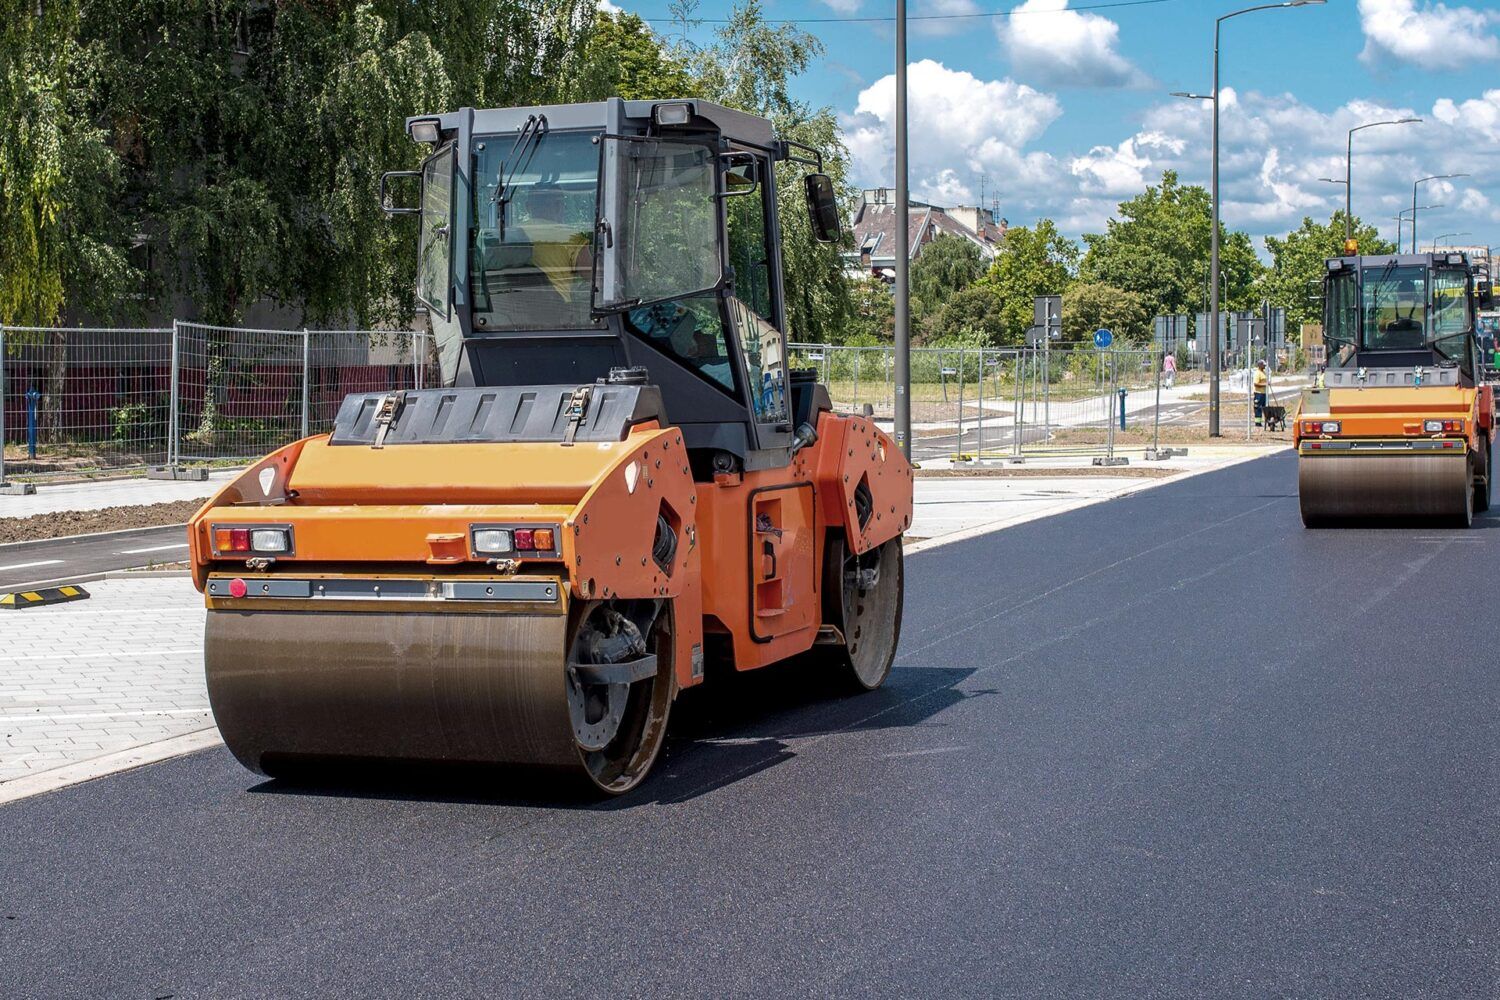 Roller Compactor Online Training  Online Safety Certification Course